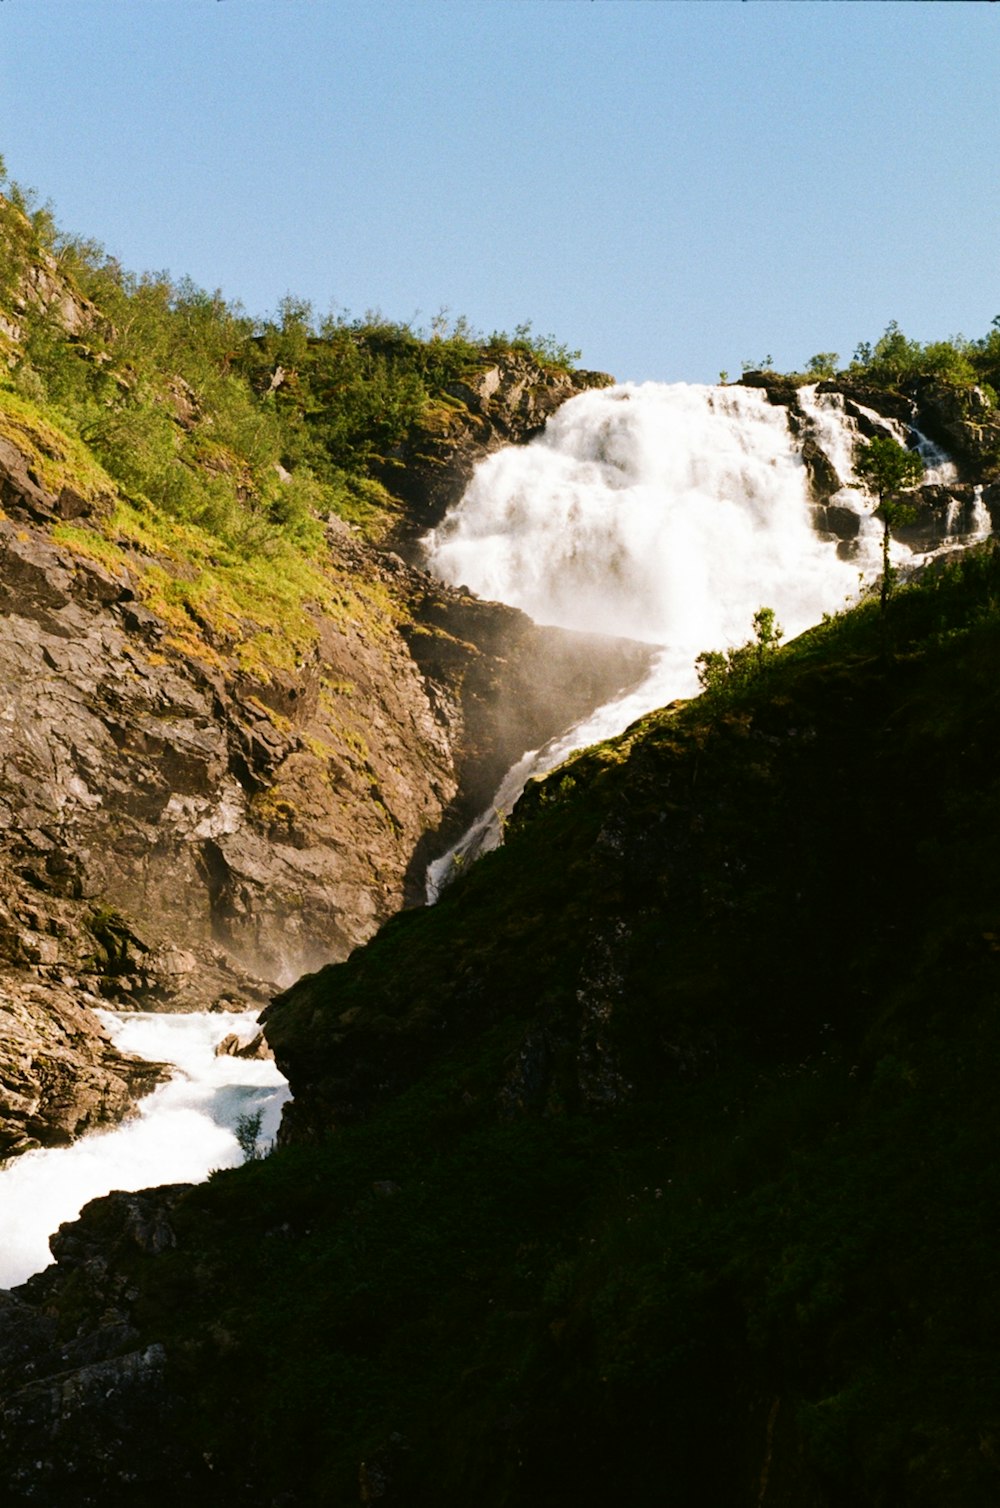 a view of a waterfall from the side of a hill